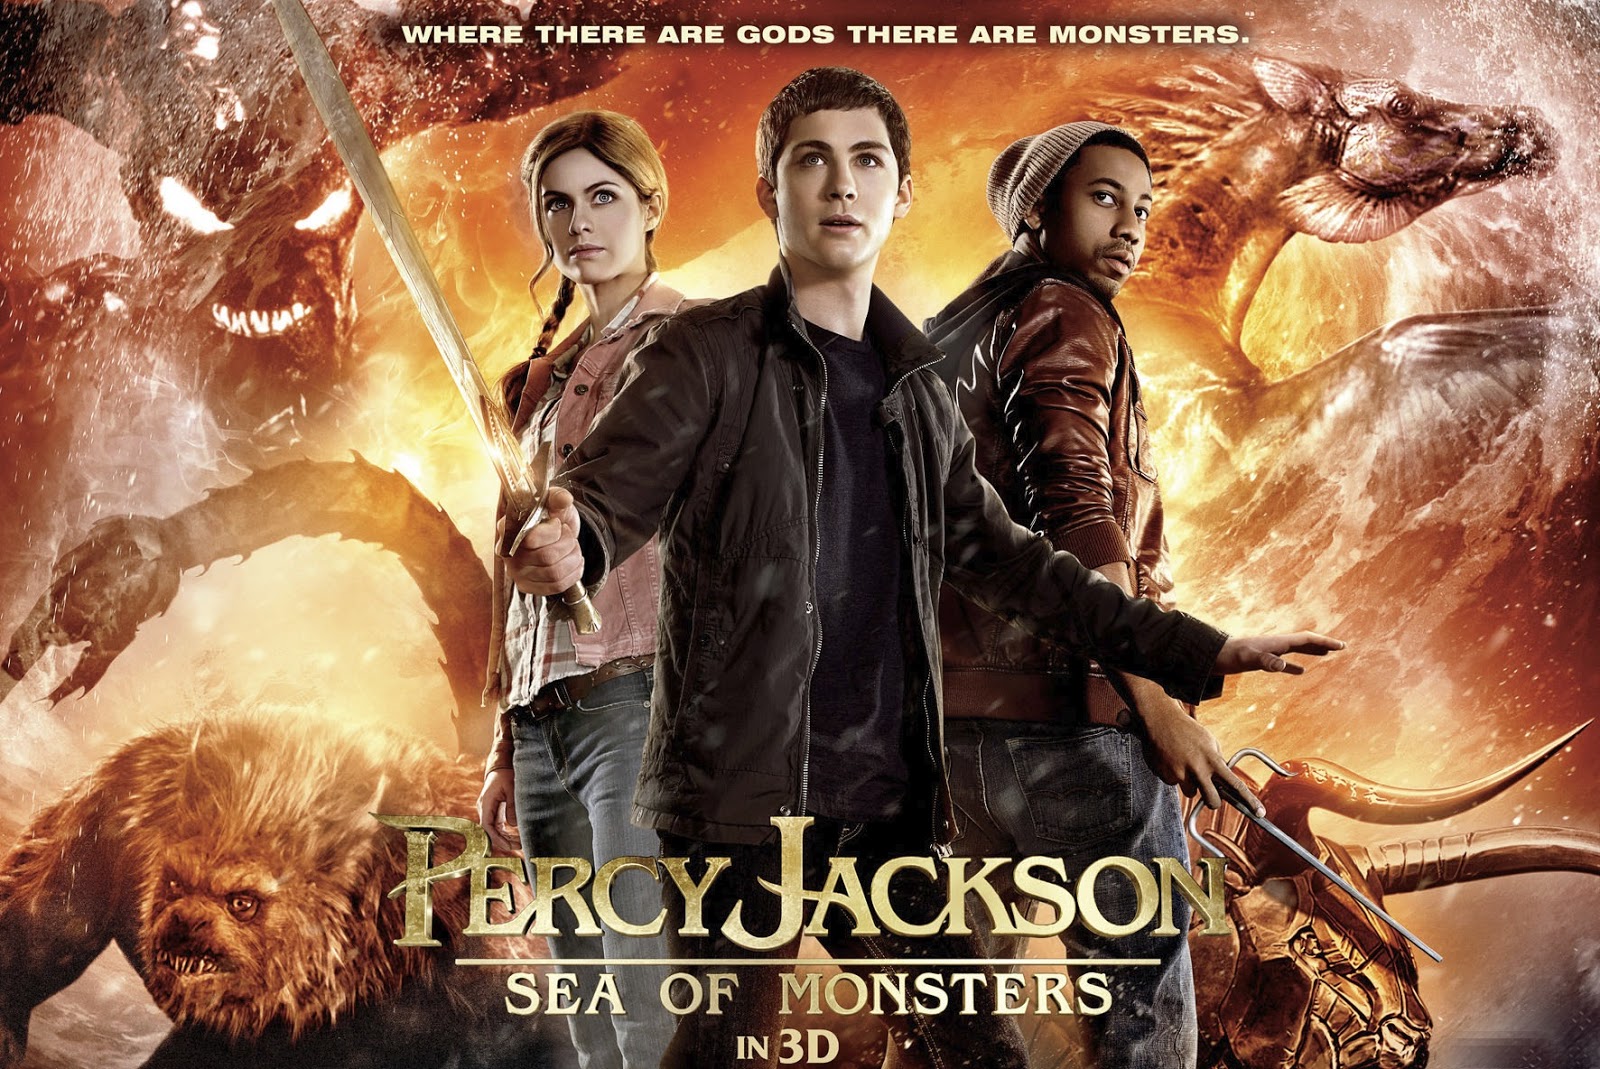 Downloads Percy Jackson: Sea Of Monsters | Official Teaser 1 HD | 2013 - Percy Jackson Sea of Monsters Official Movie Site View 